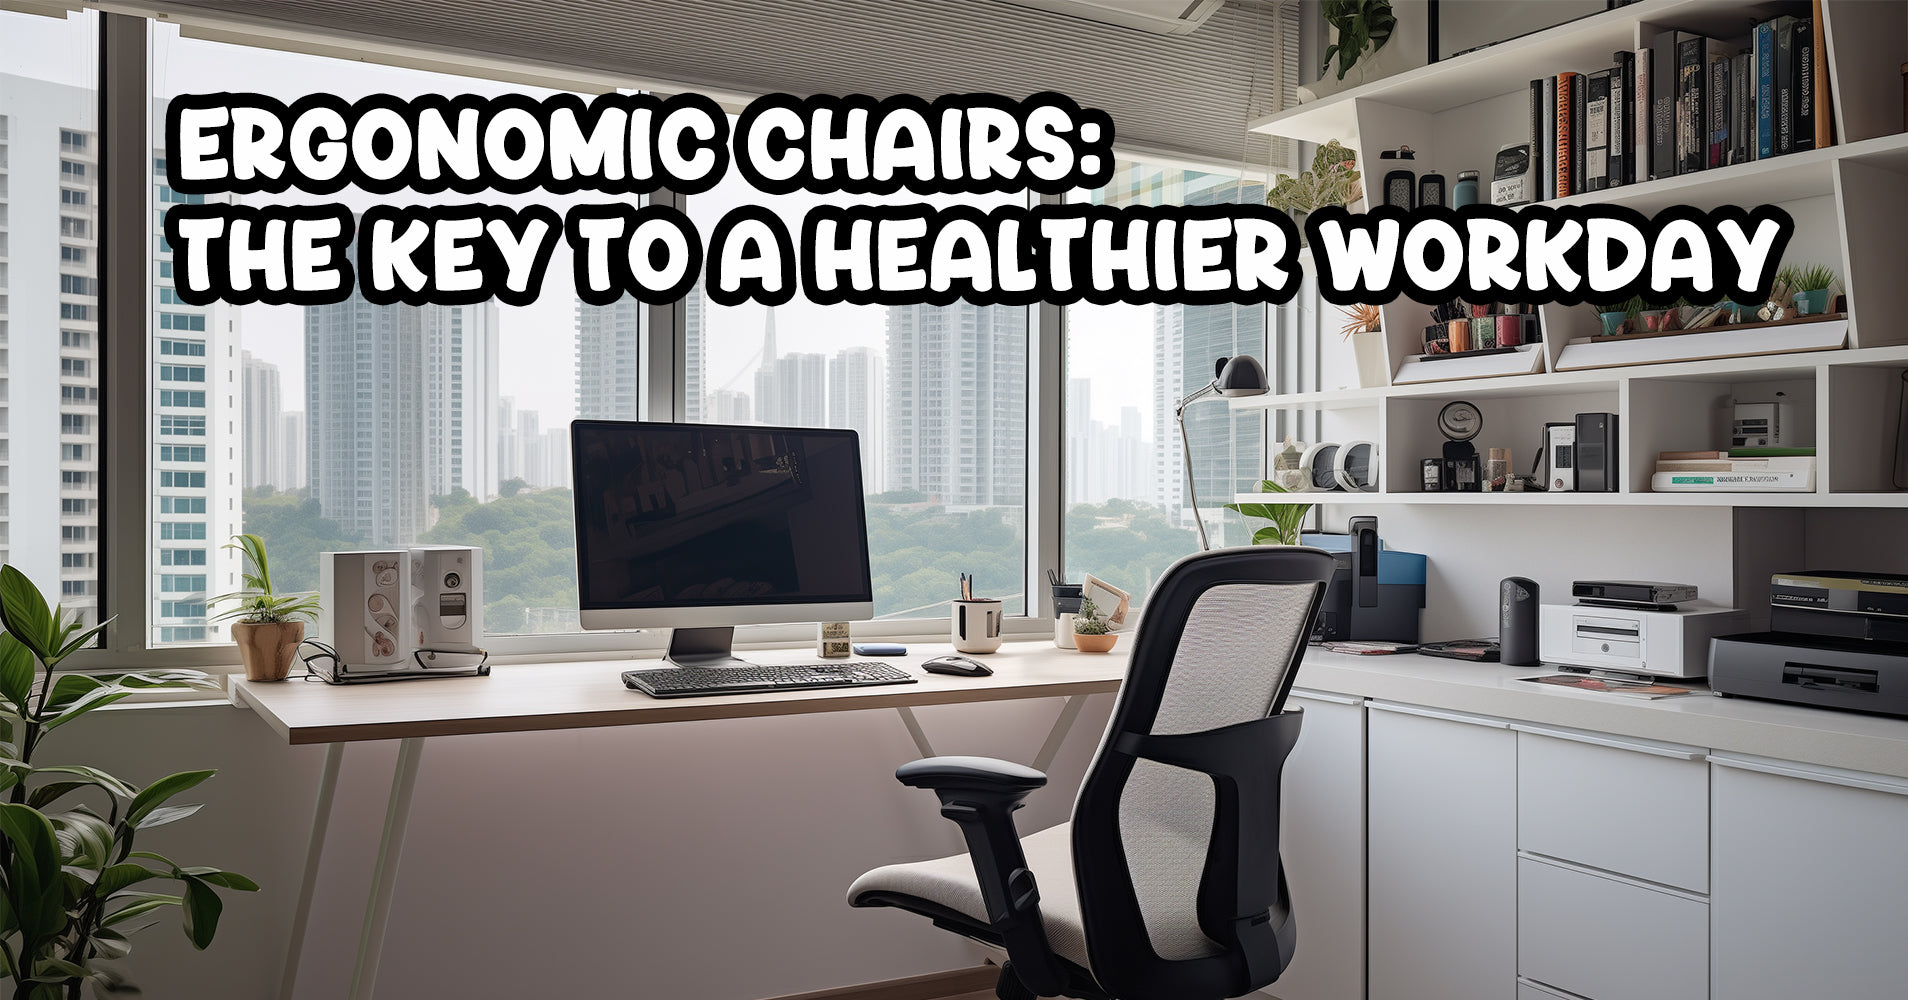 Modern ergonomic chair in a well-lit home office overlooking Singapore skyline, illustrating a healthier workday